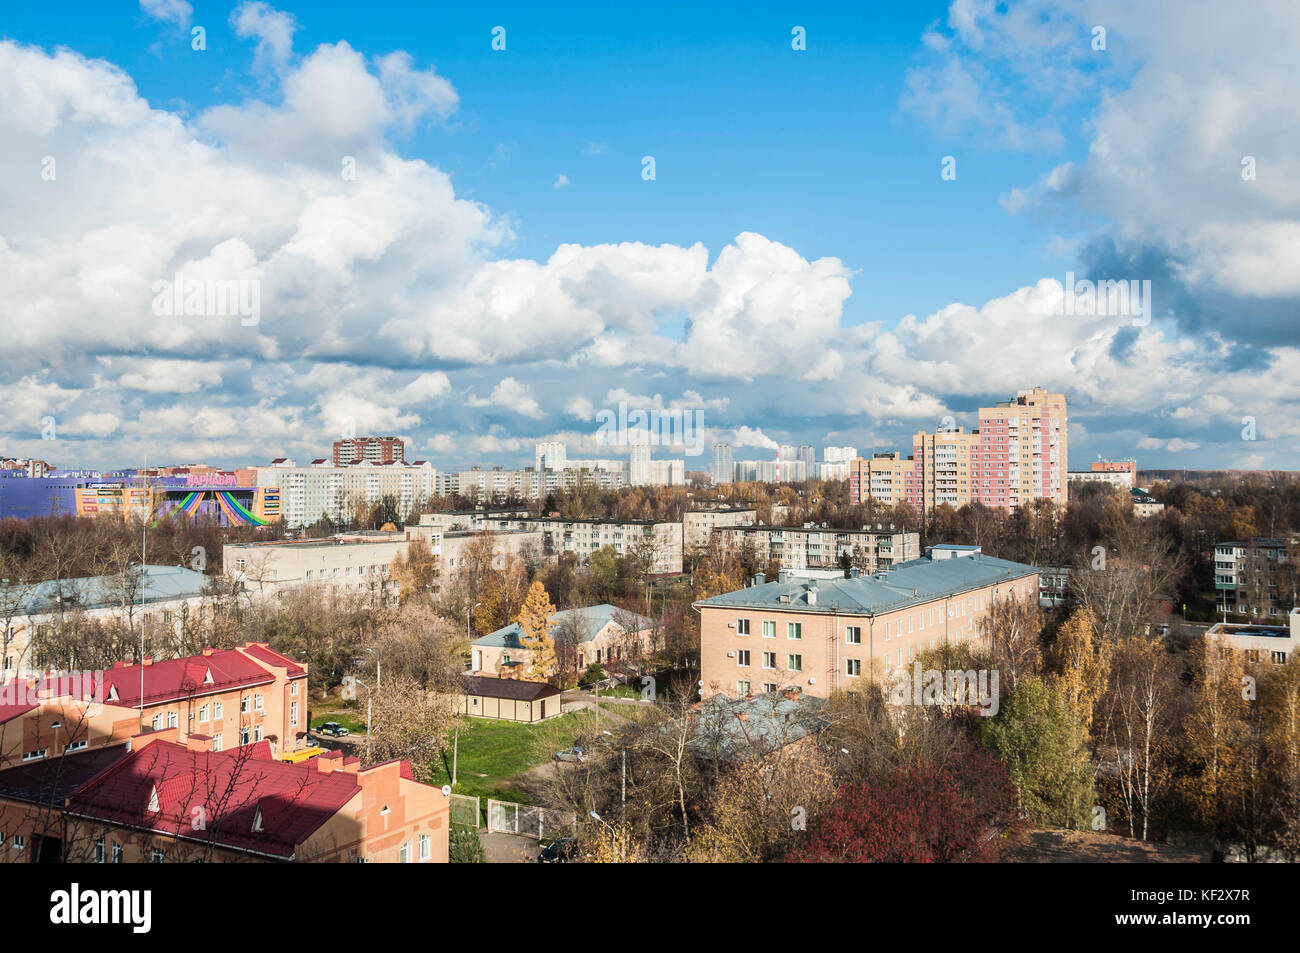 A new town under a huge sky with white clouds Stock Photo